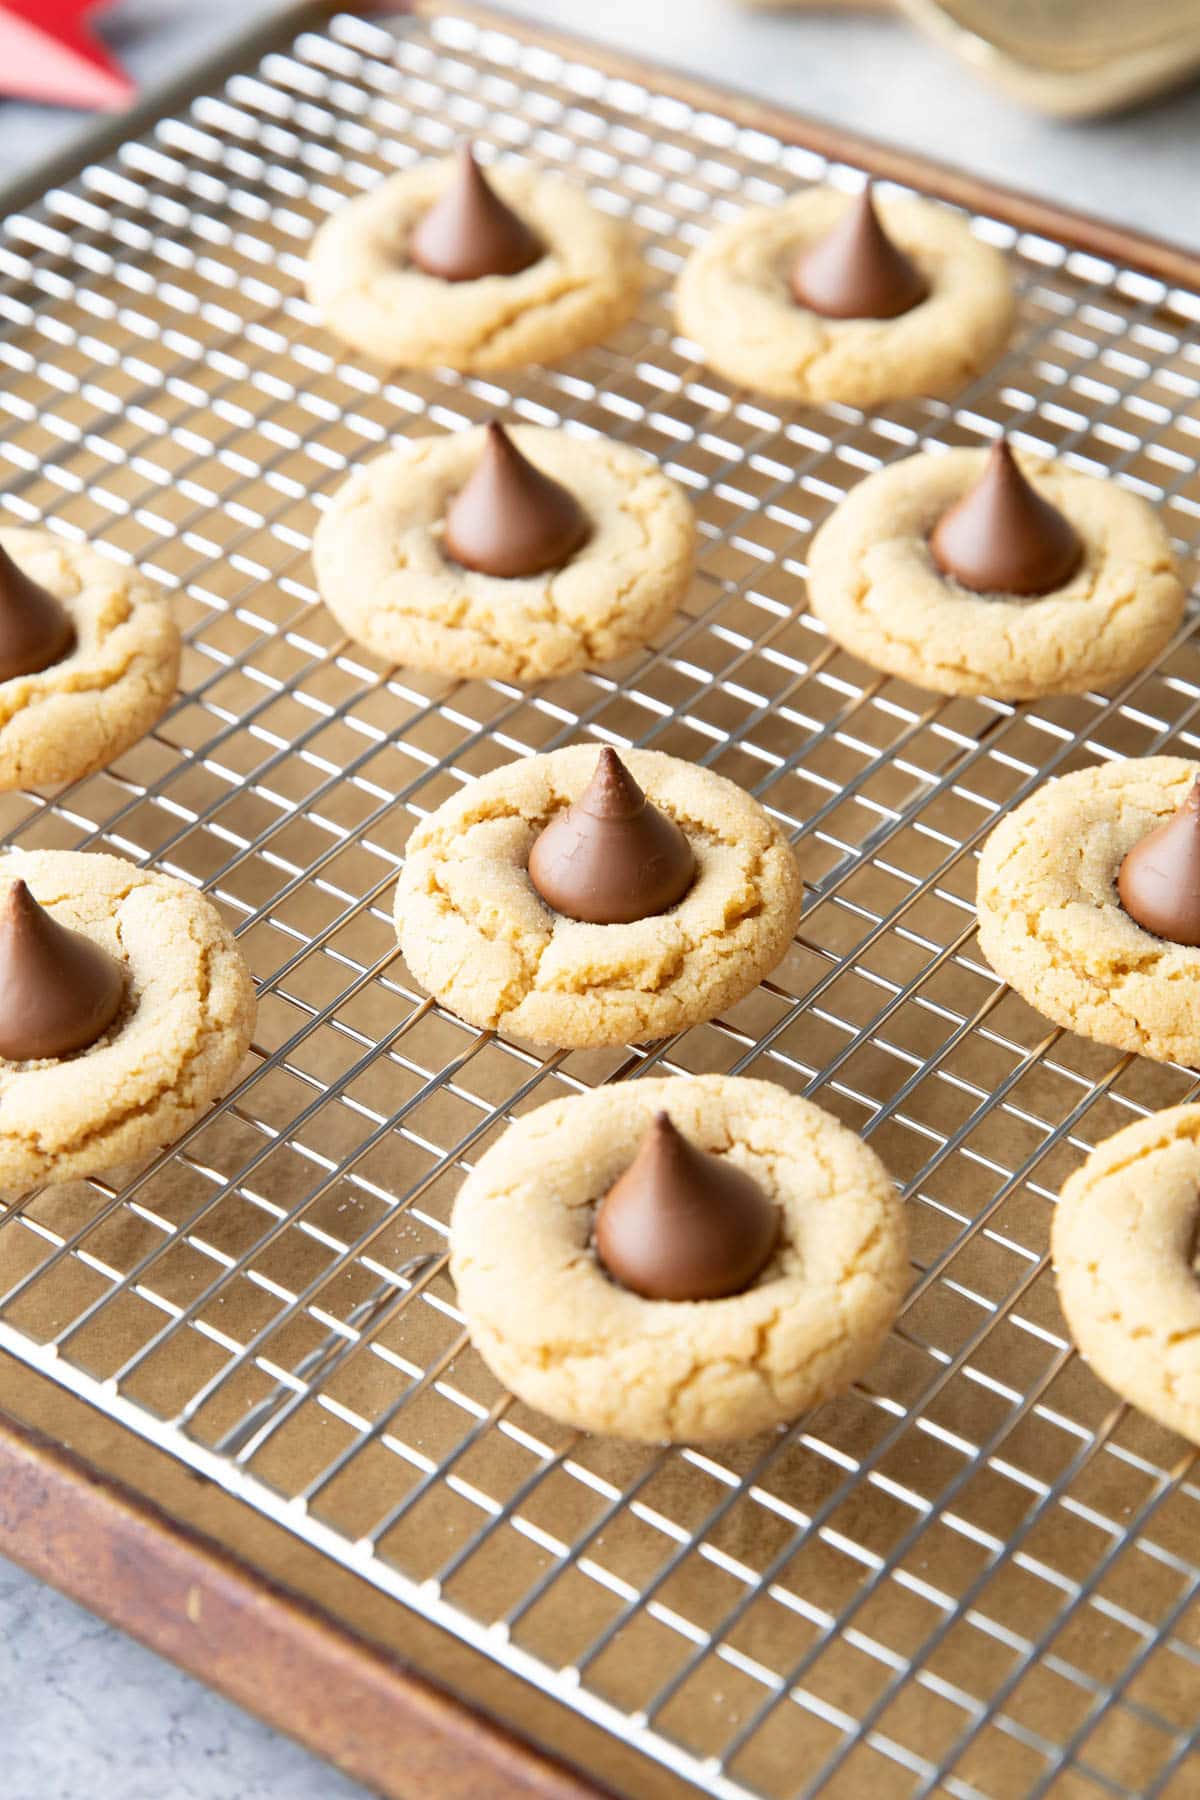 Peanut Butter Blossoms arranged evenly spaced apart on a silver cooling rack placed over a baking sheet